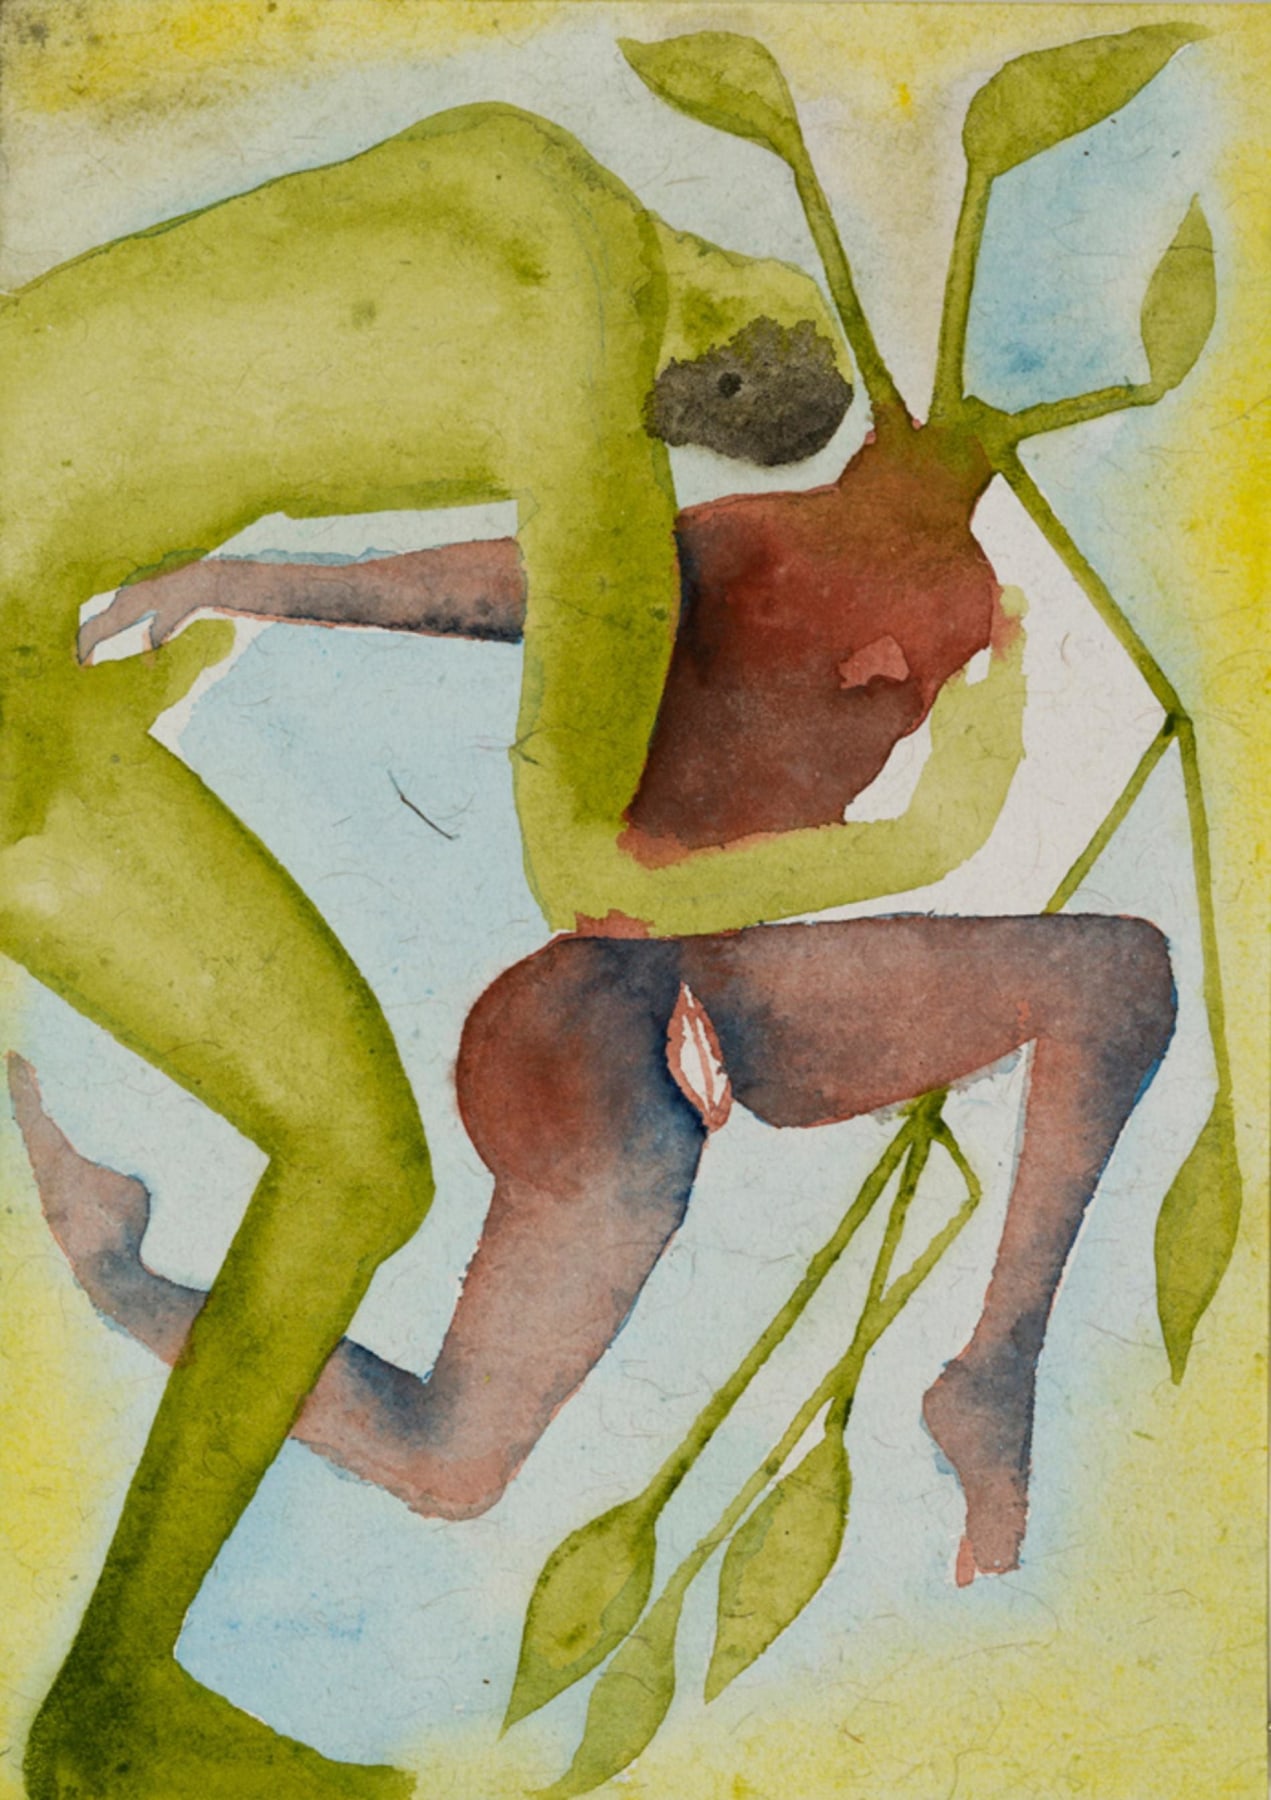 Image of  FRANCESCO CLEMENTE's A Story Well Told (04), 2013